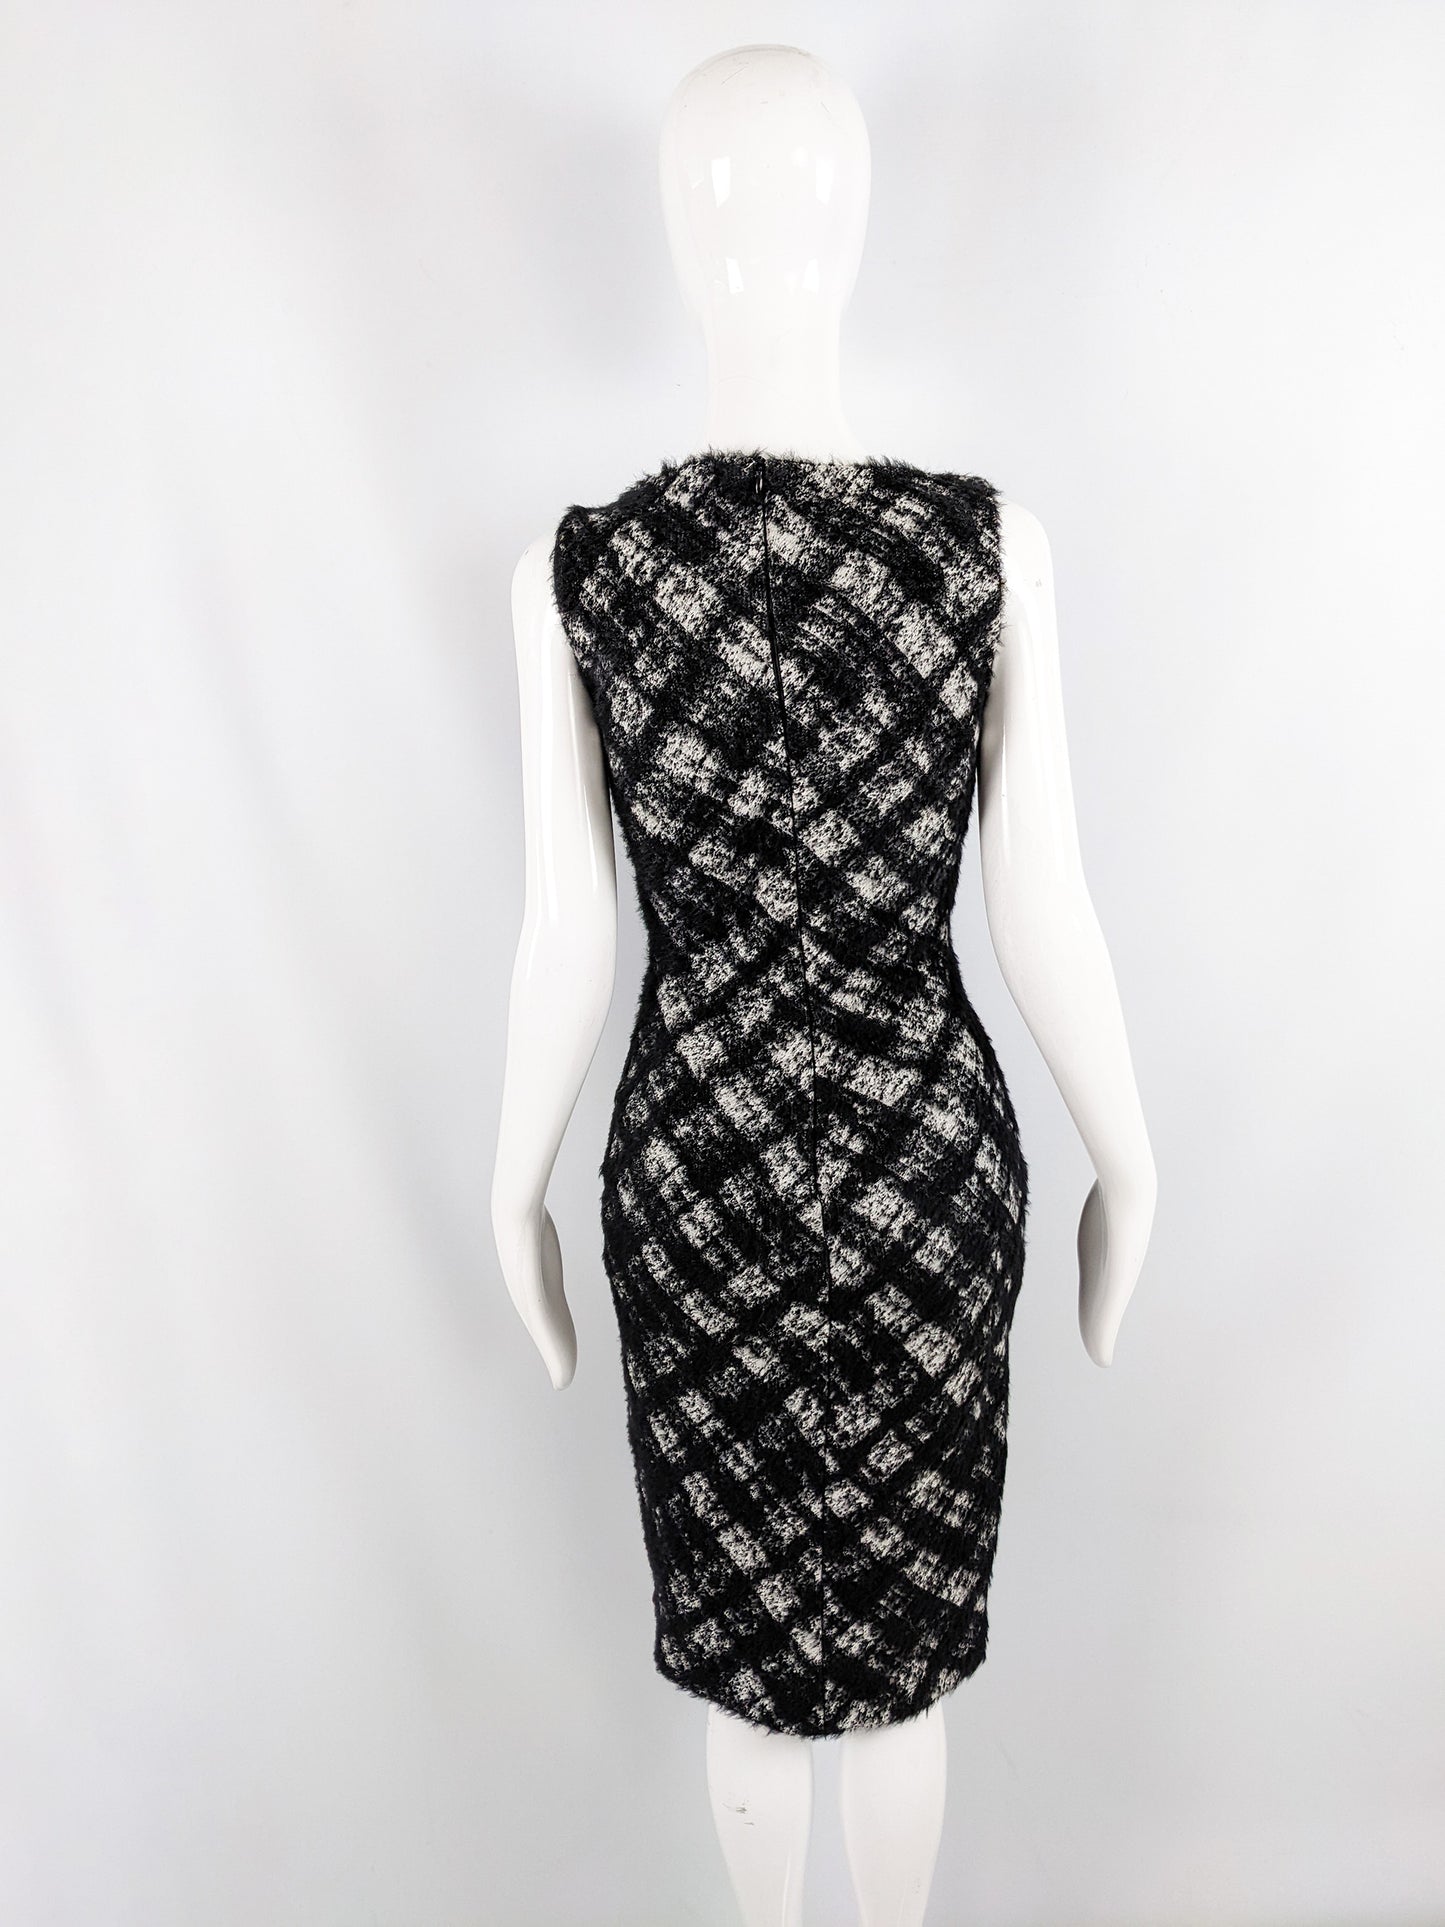 Plein Sud Vintage Black & White Checked Structural Party Dress, 1990s